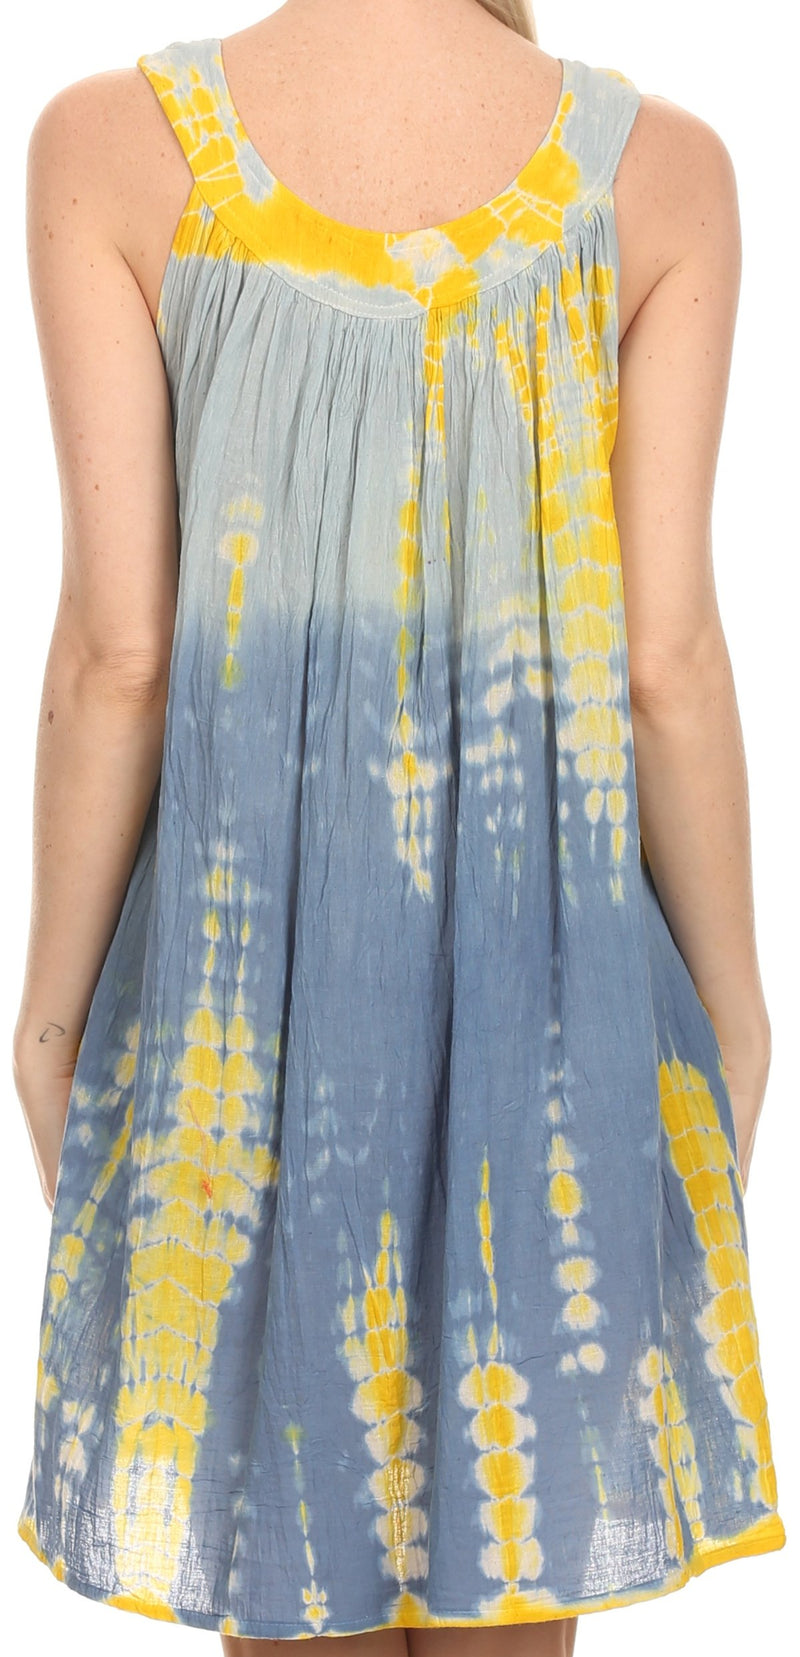 Sakkas  Amber Rose Sleeveless V-Neck Embroidered Ombre Tie Dye Tank Top Blouse / Tunic